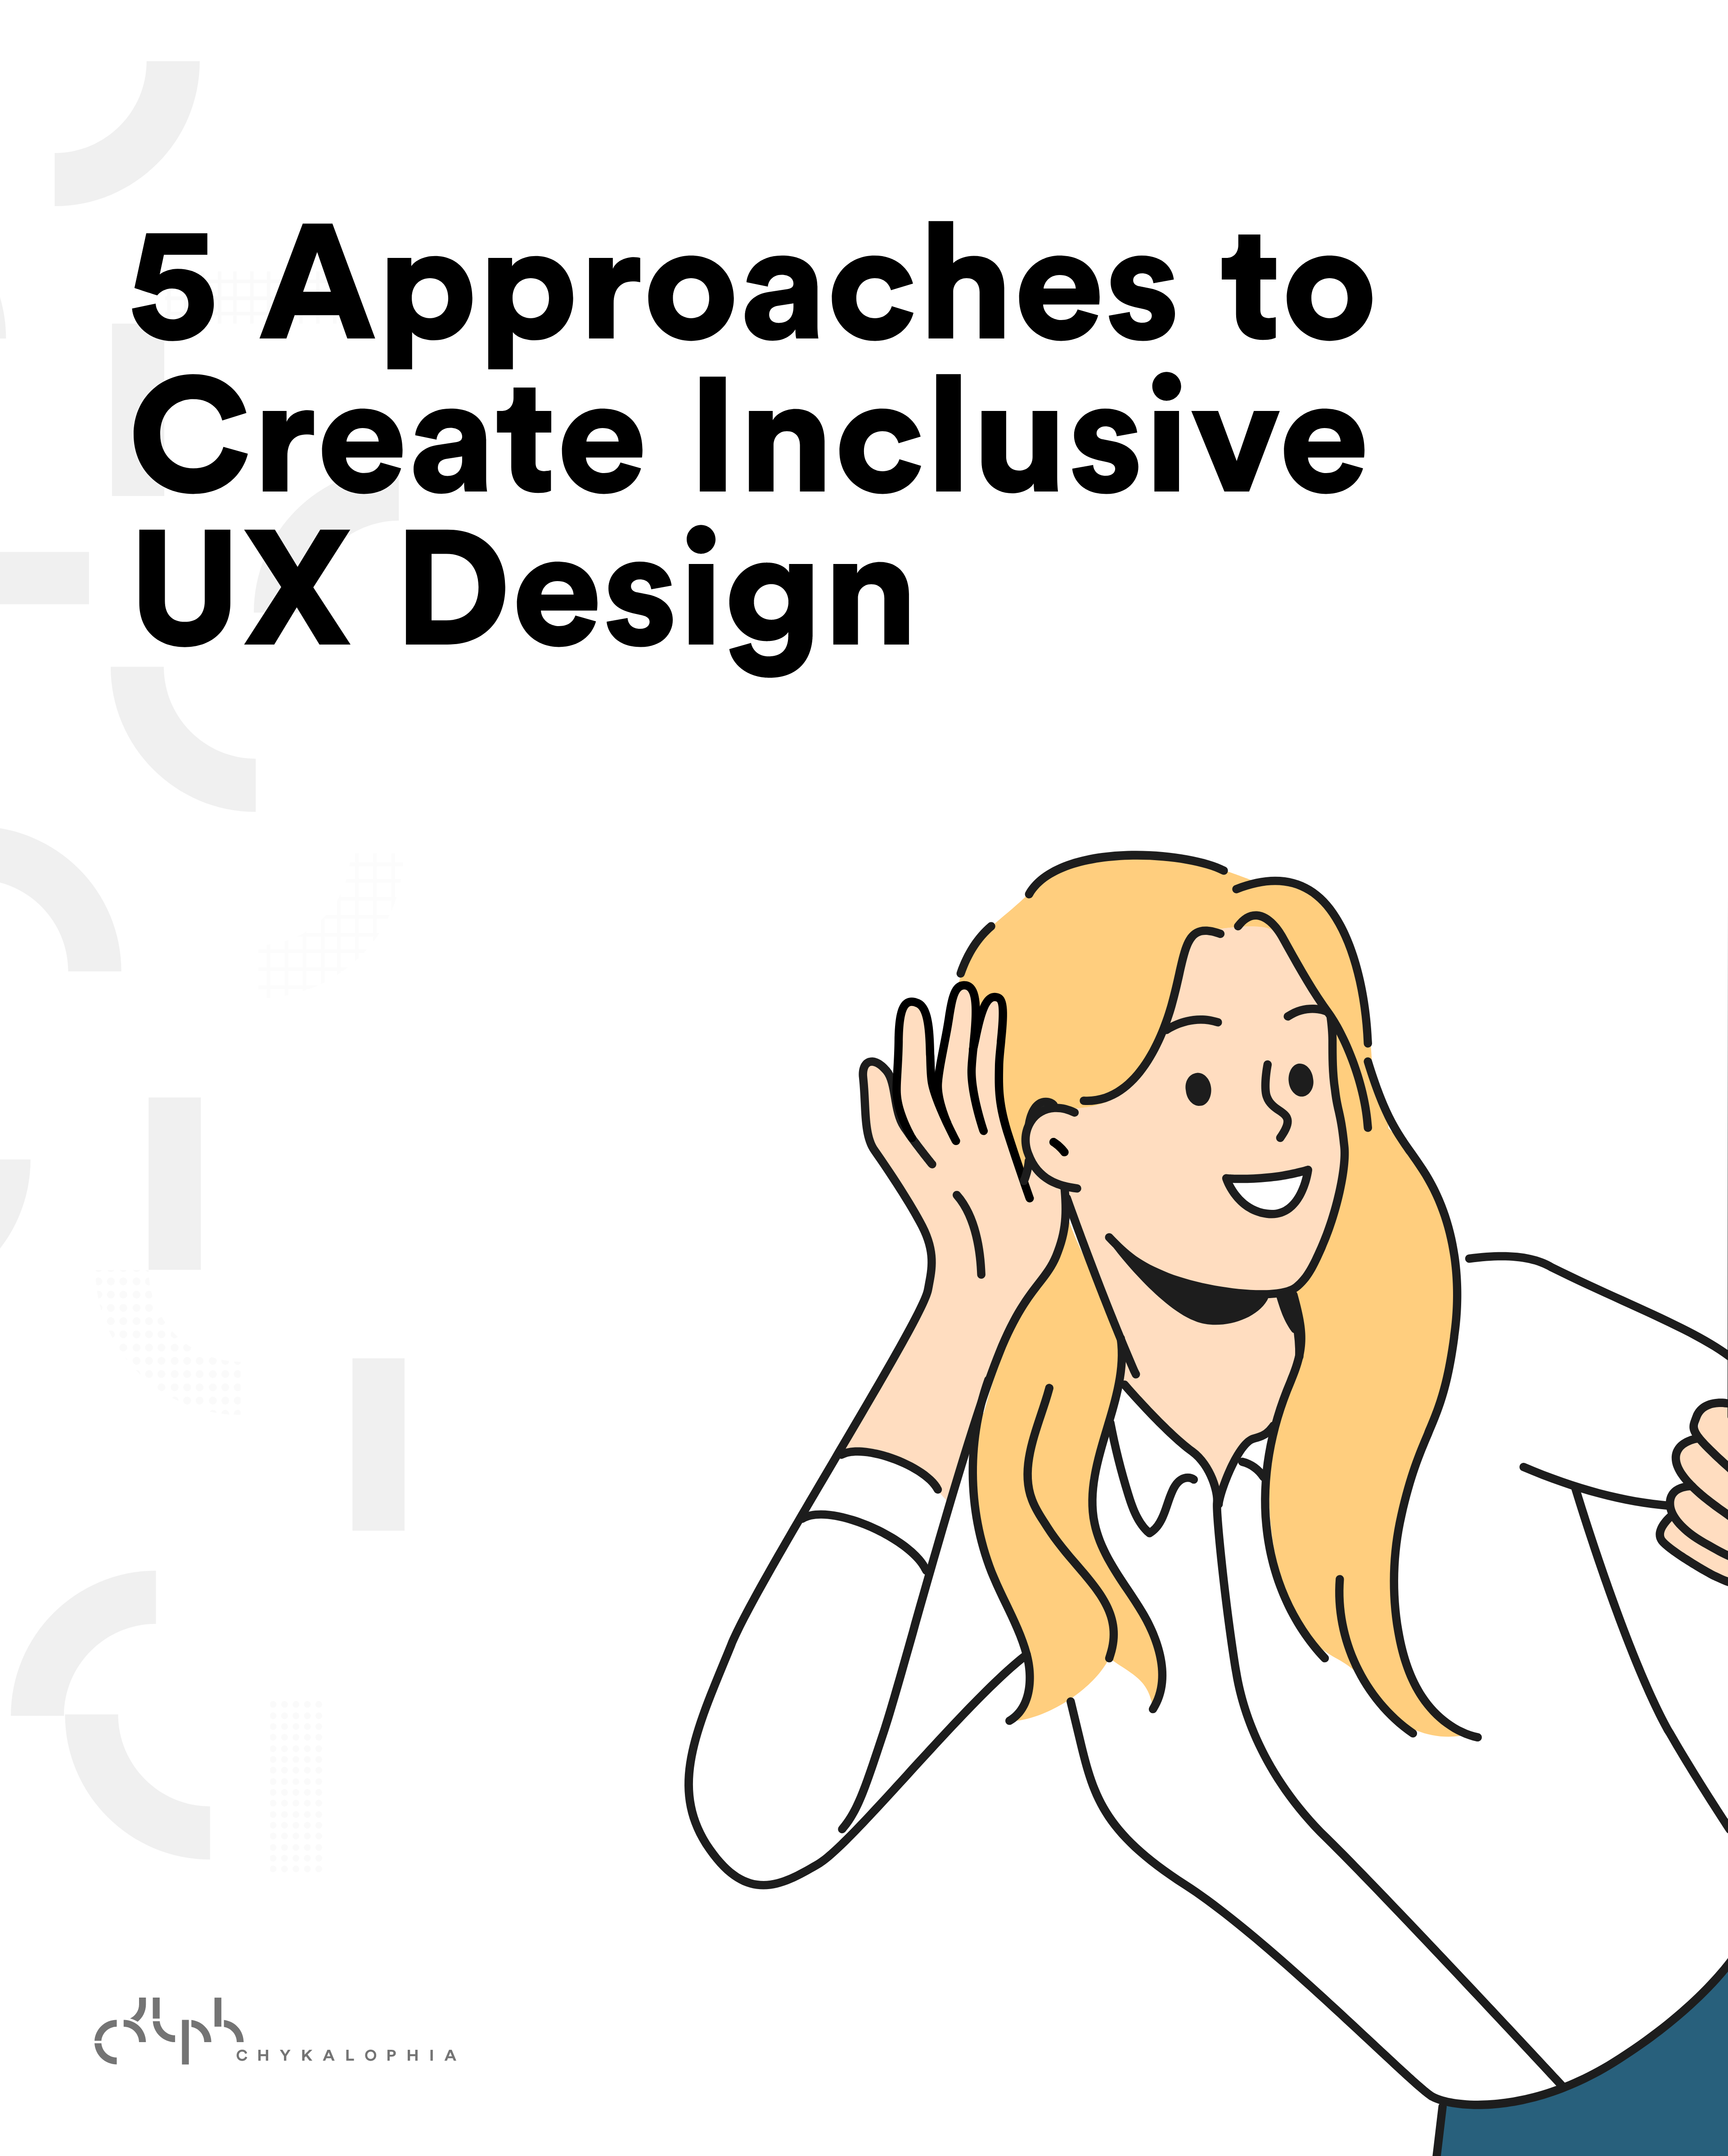 How to create inclusive UX design and foster diversity in UX